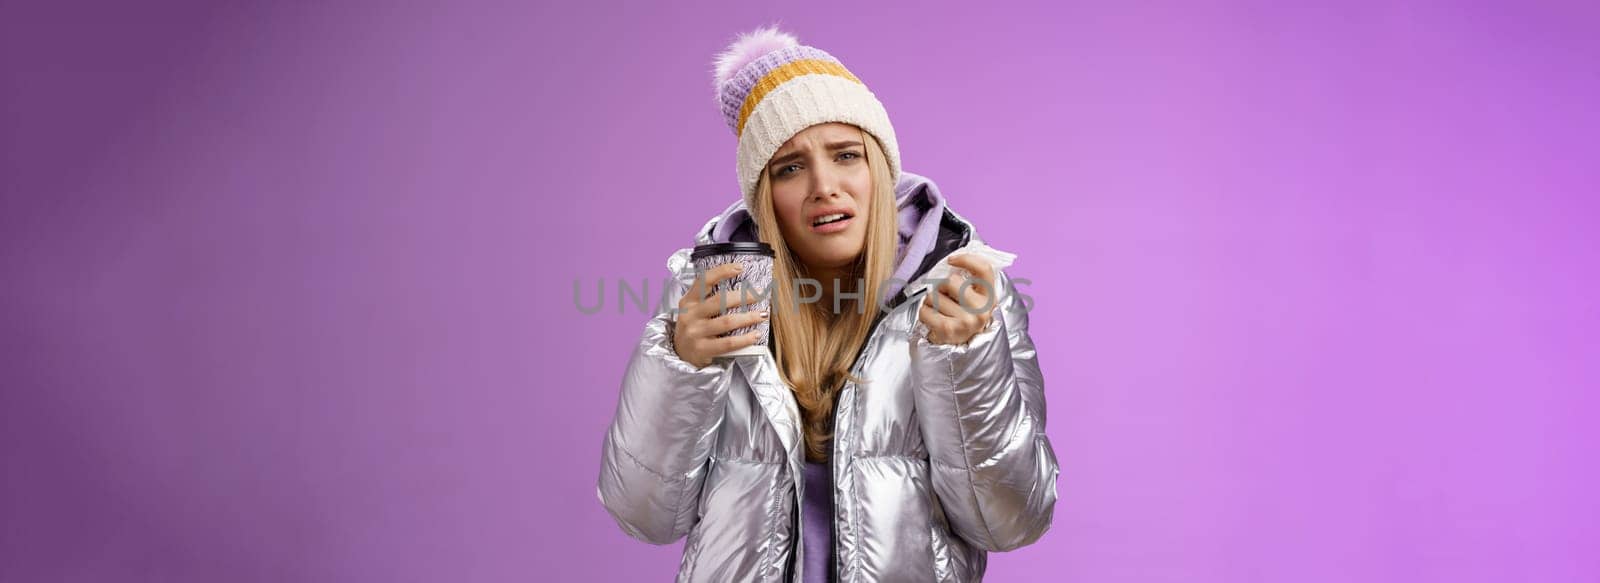 Lifestyle. Upset dizzy cute blond girl got sick feel unwell grimacing hold hot tea take-away cup tissue sneezing suffering high temperature runny nose headache standing uncomfortable bad purple background.